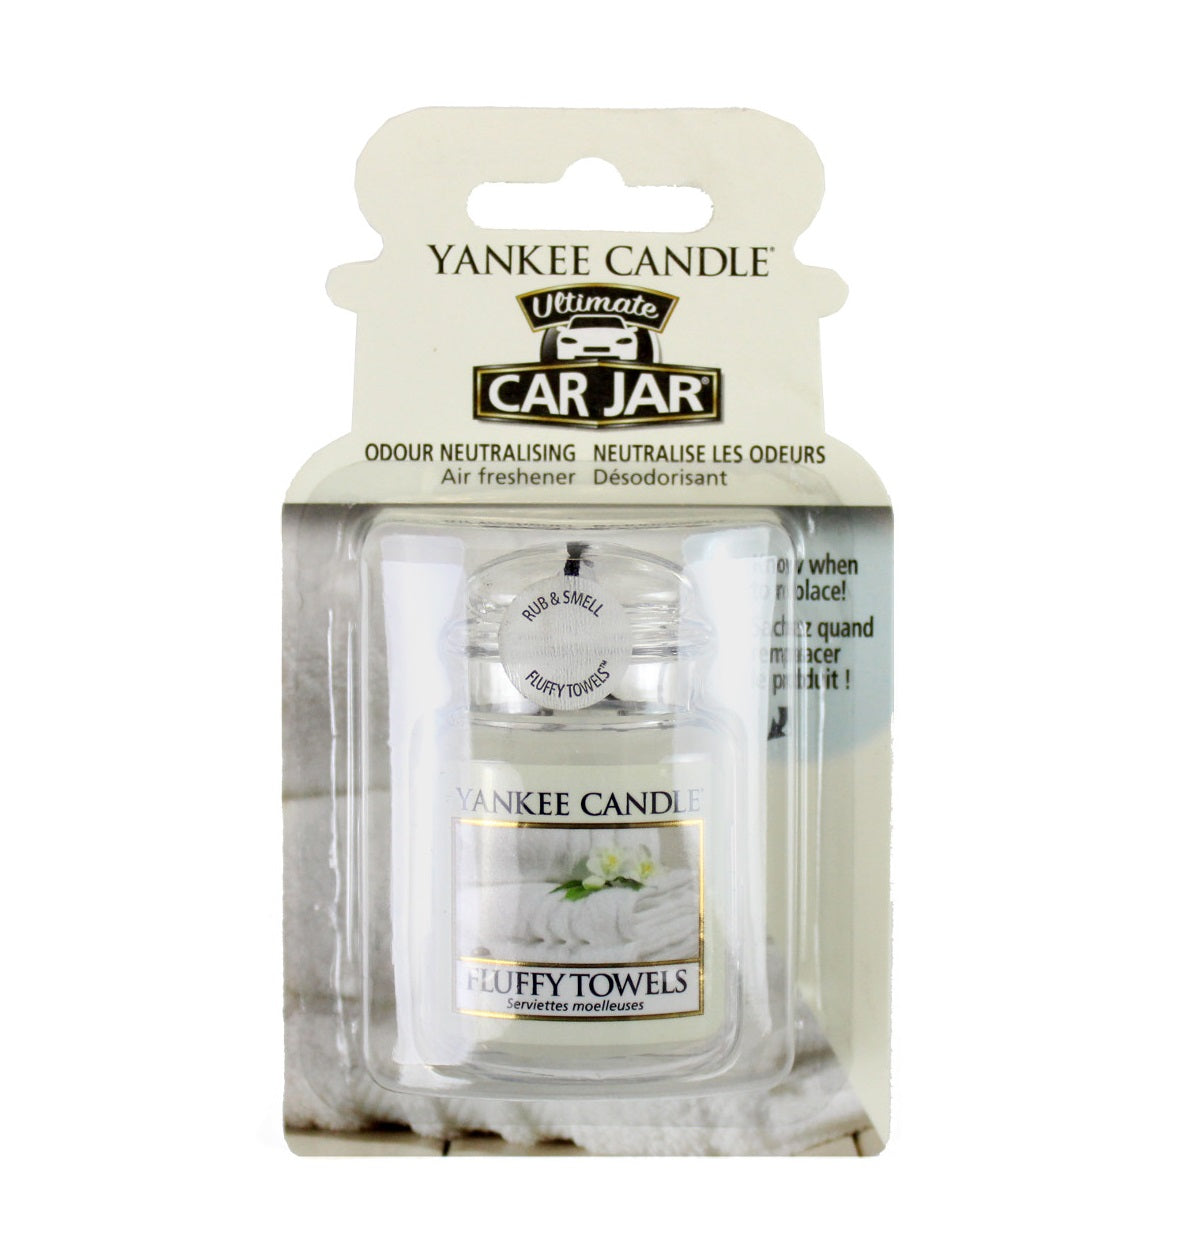 FLUFFY TOWELS -Yankee Candle- Car Jar Ultimate – Candle With Care